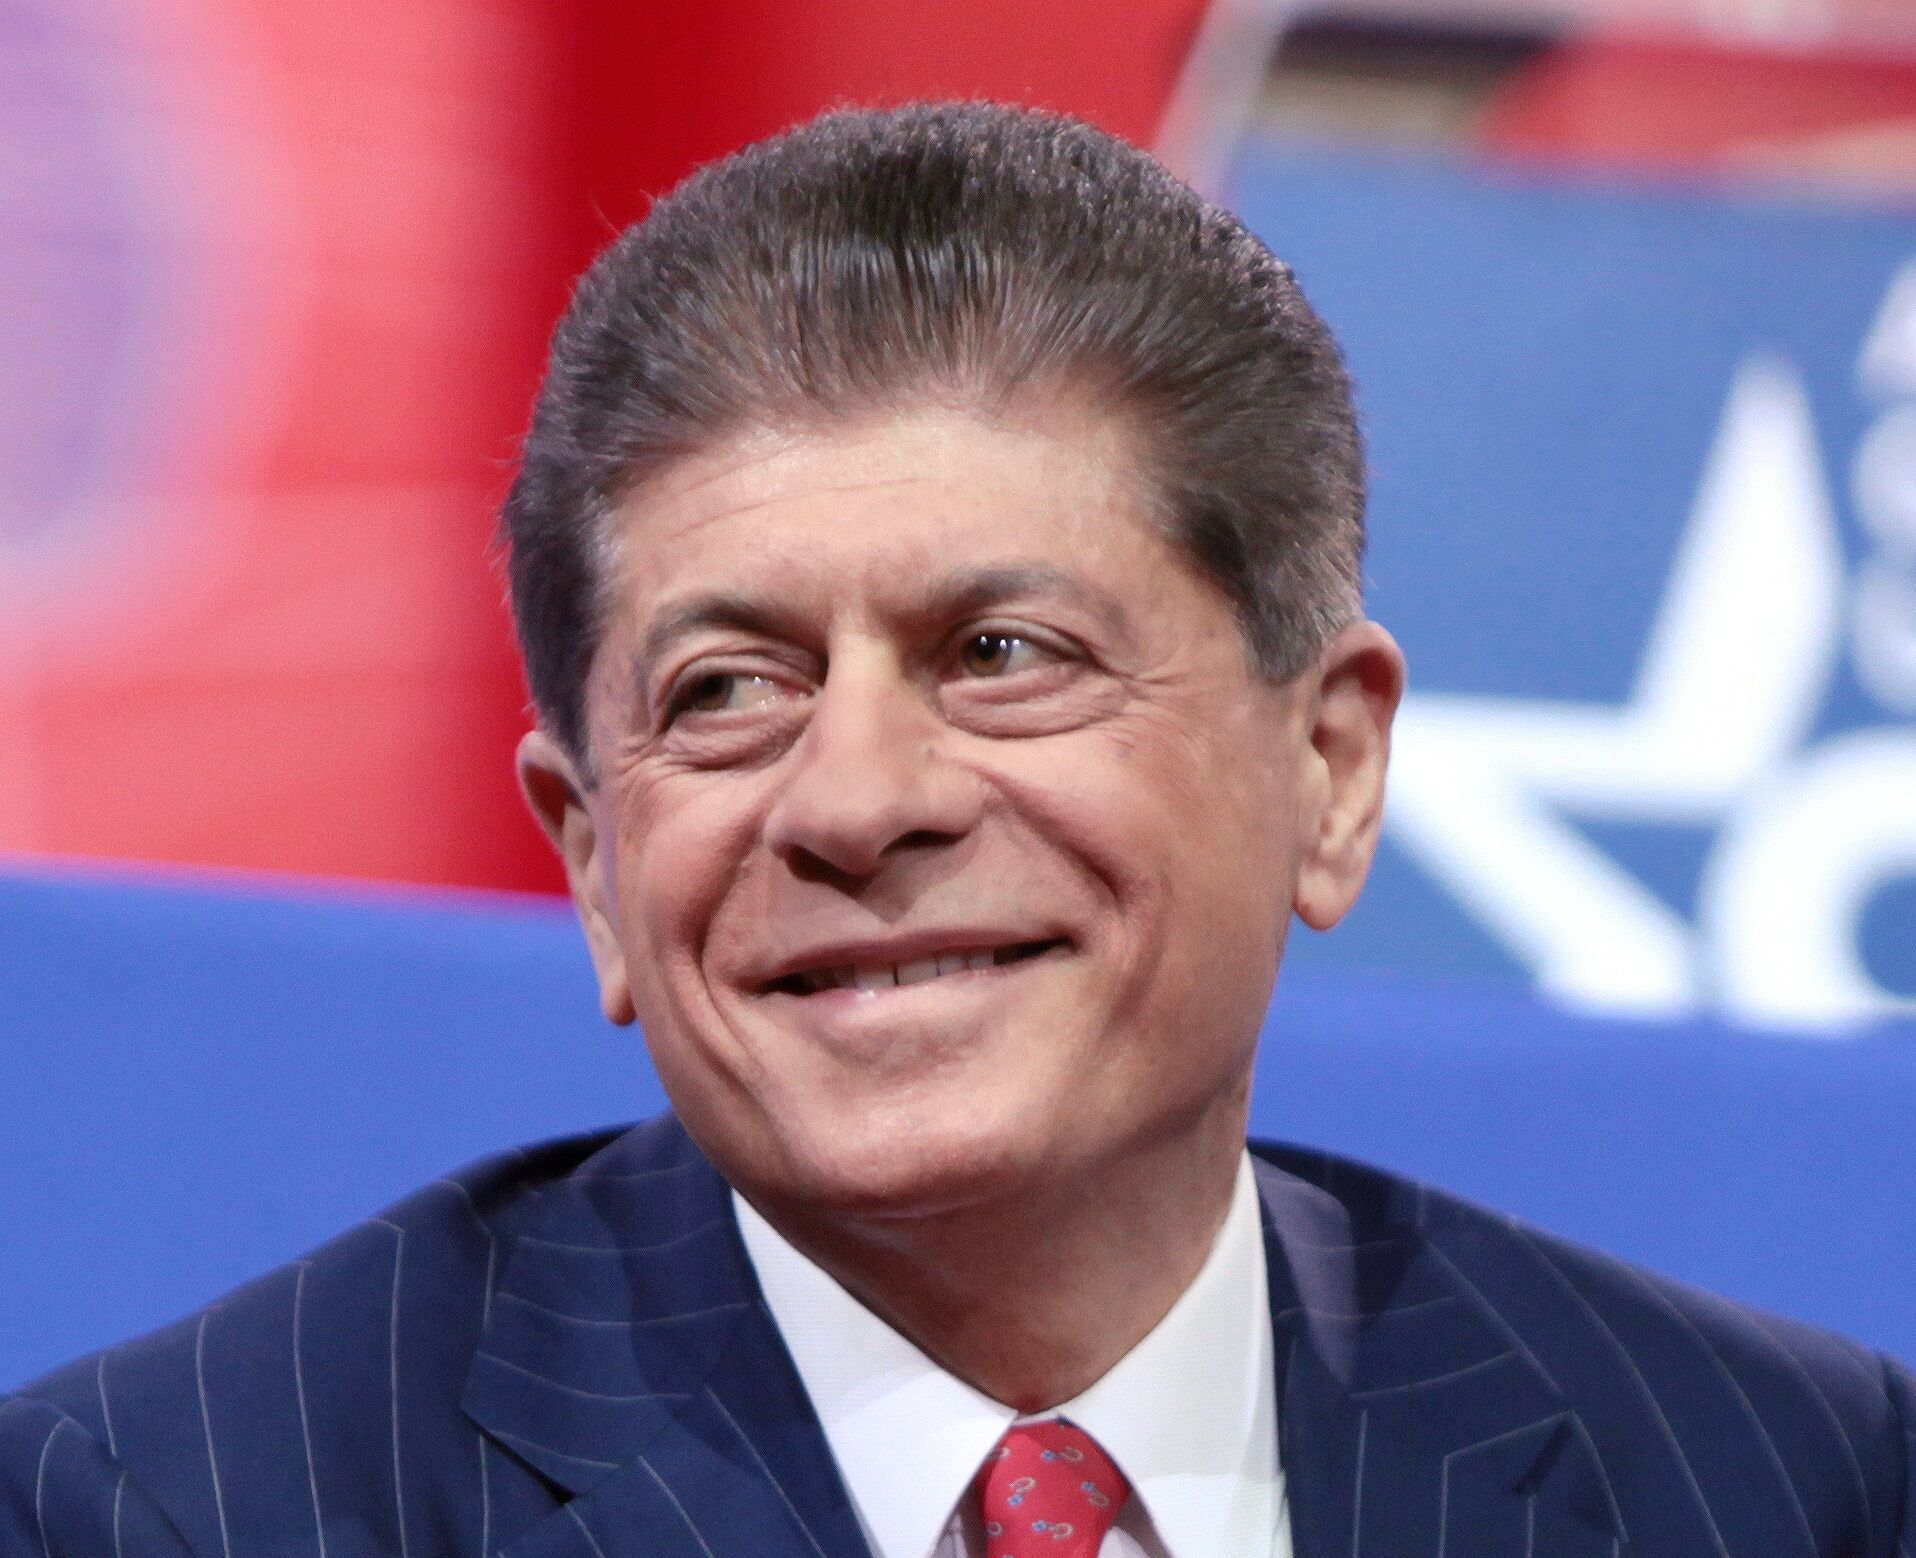 Andrew Napolitano at the 2015 Conservative Political Action Conference